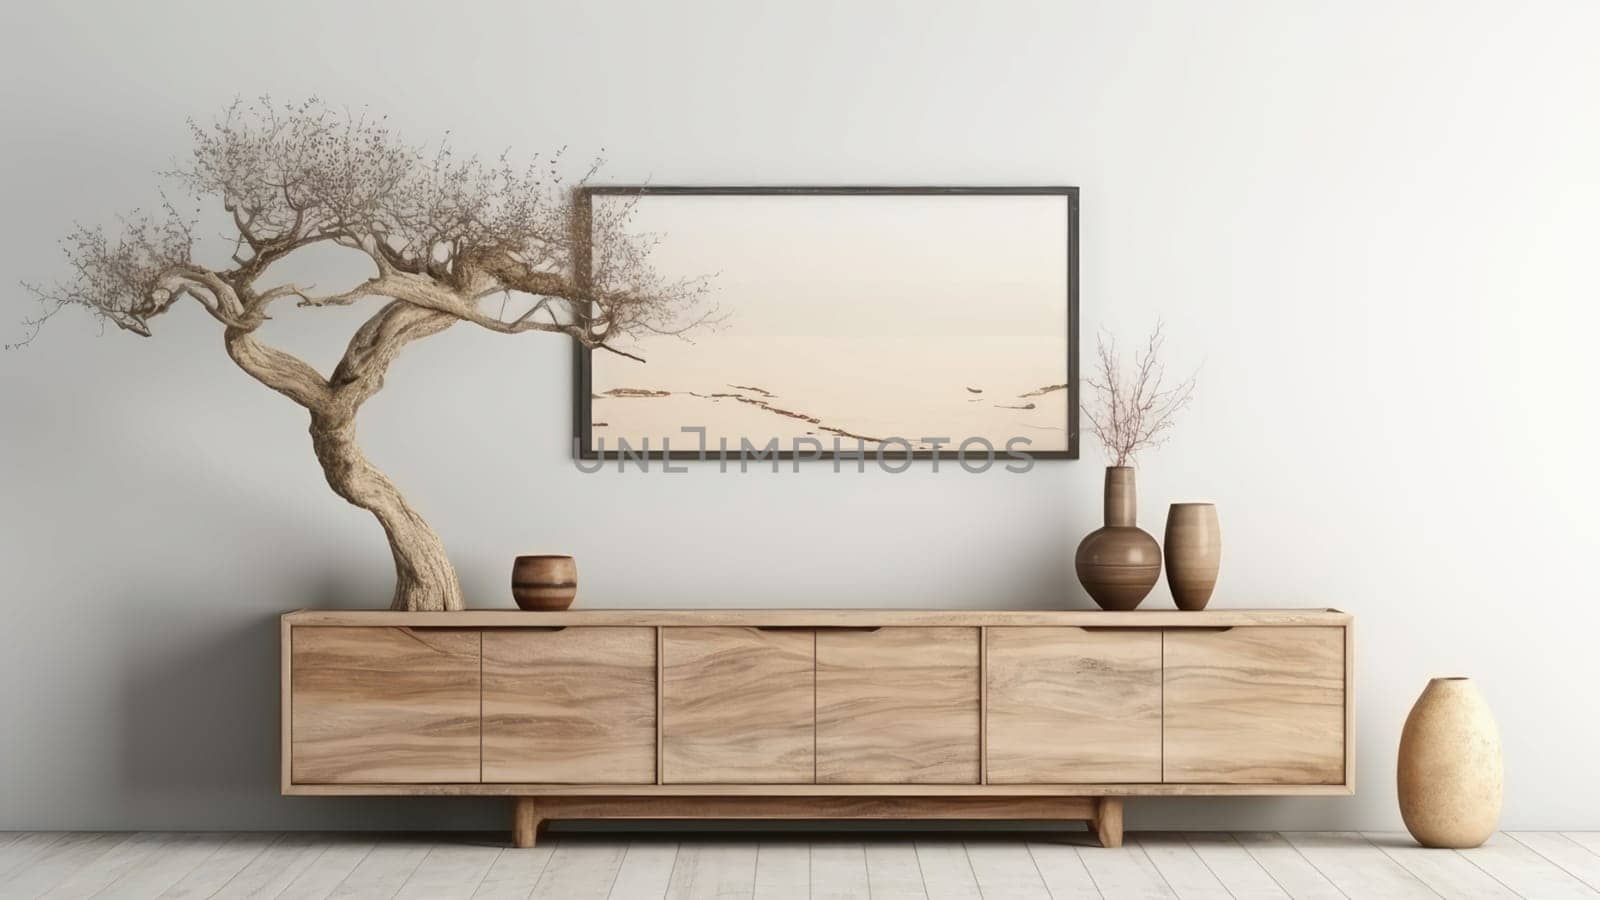 3D rendering of a wooden dresser with a tree and vases on it. The tree is a small bonsai tree and the vases are filled with dried plant.